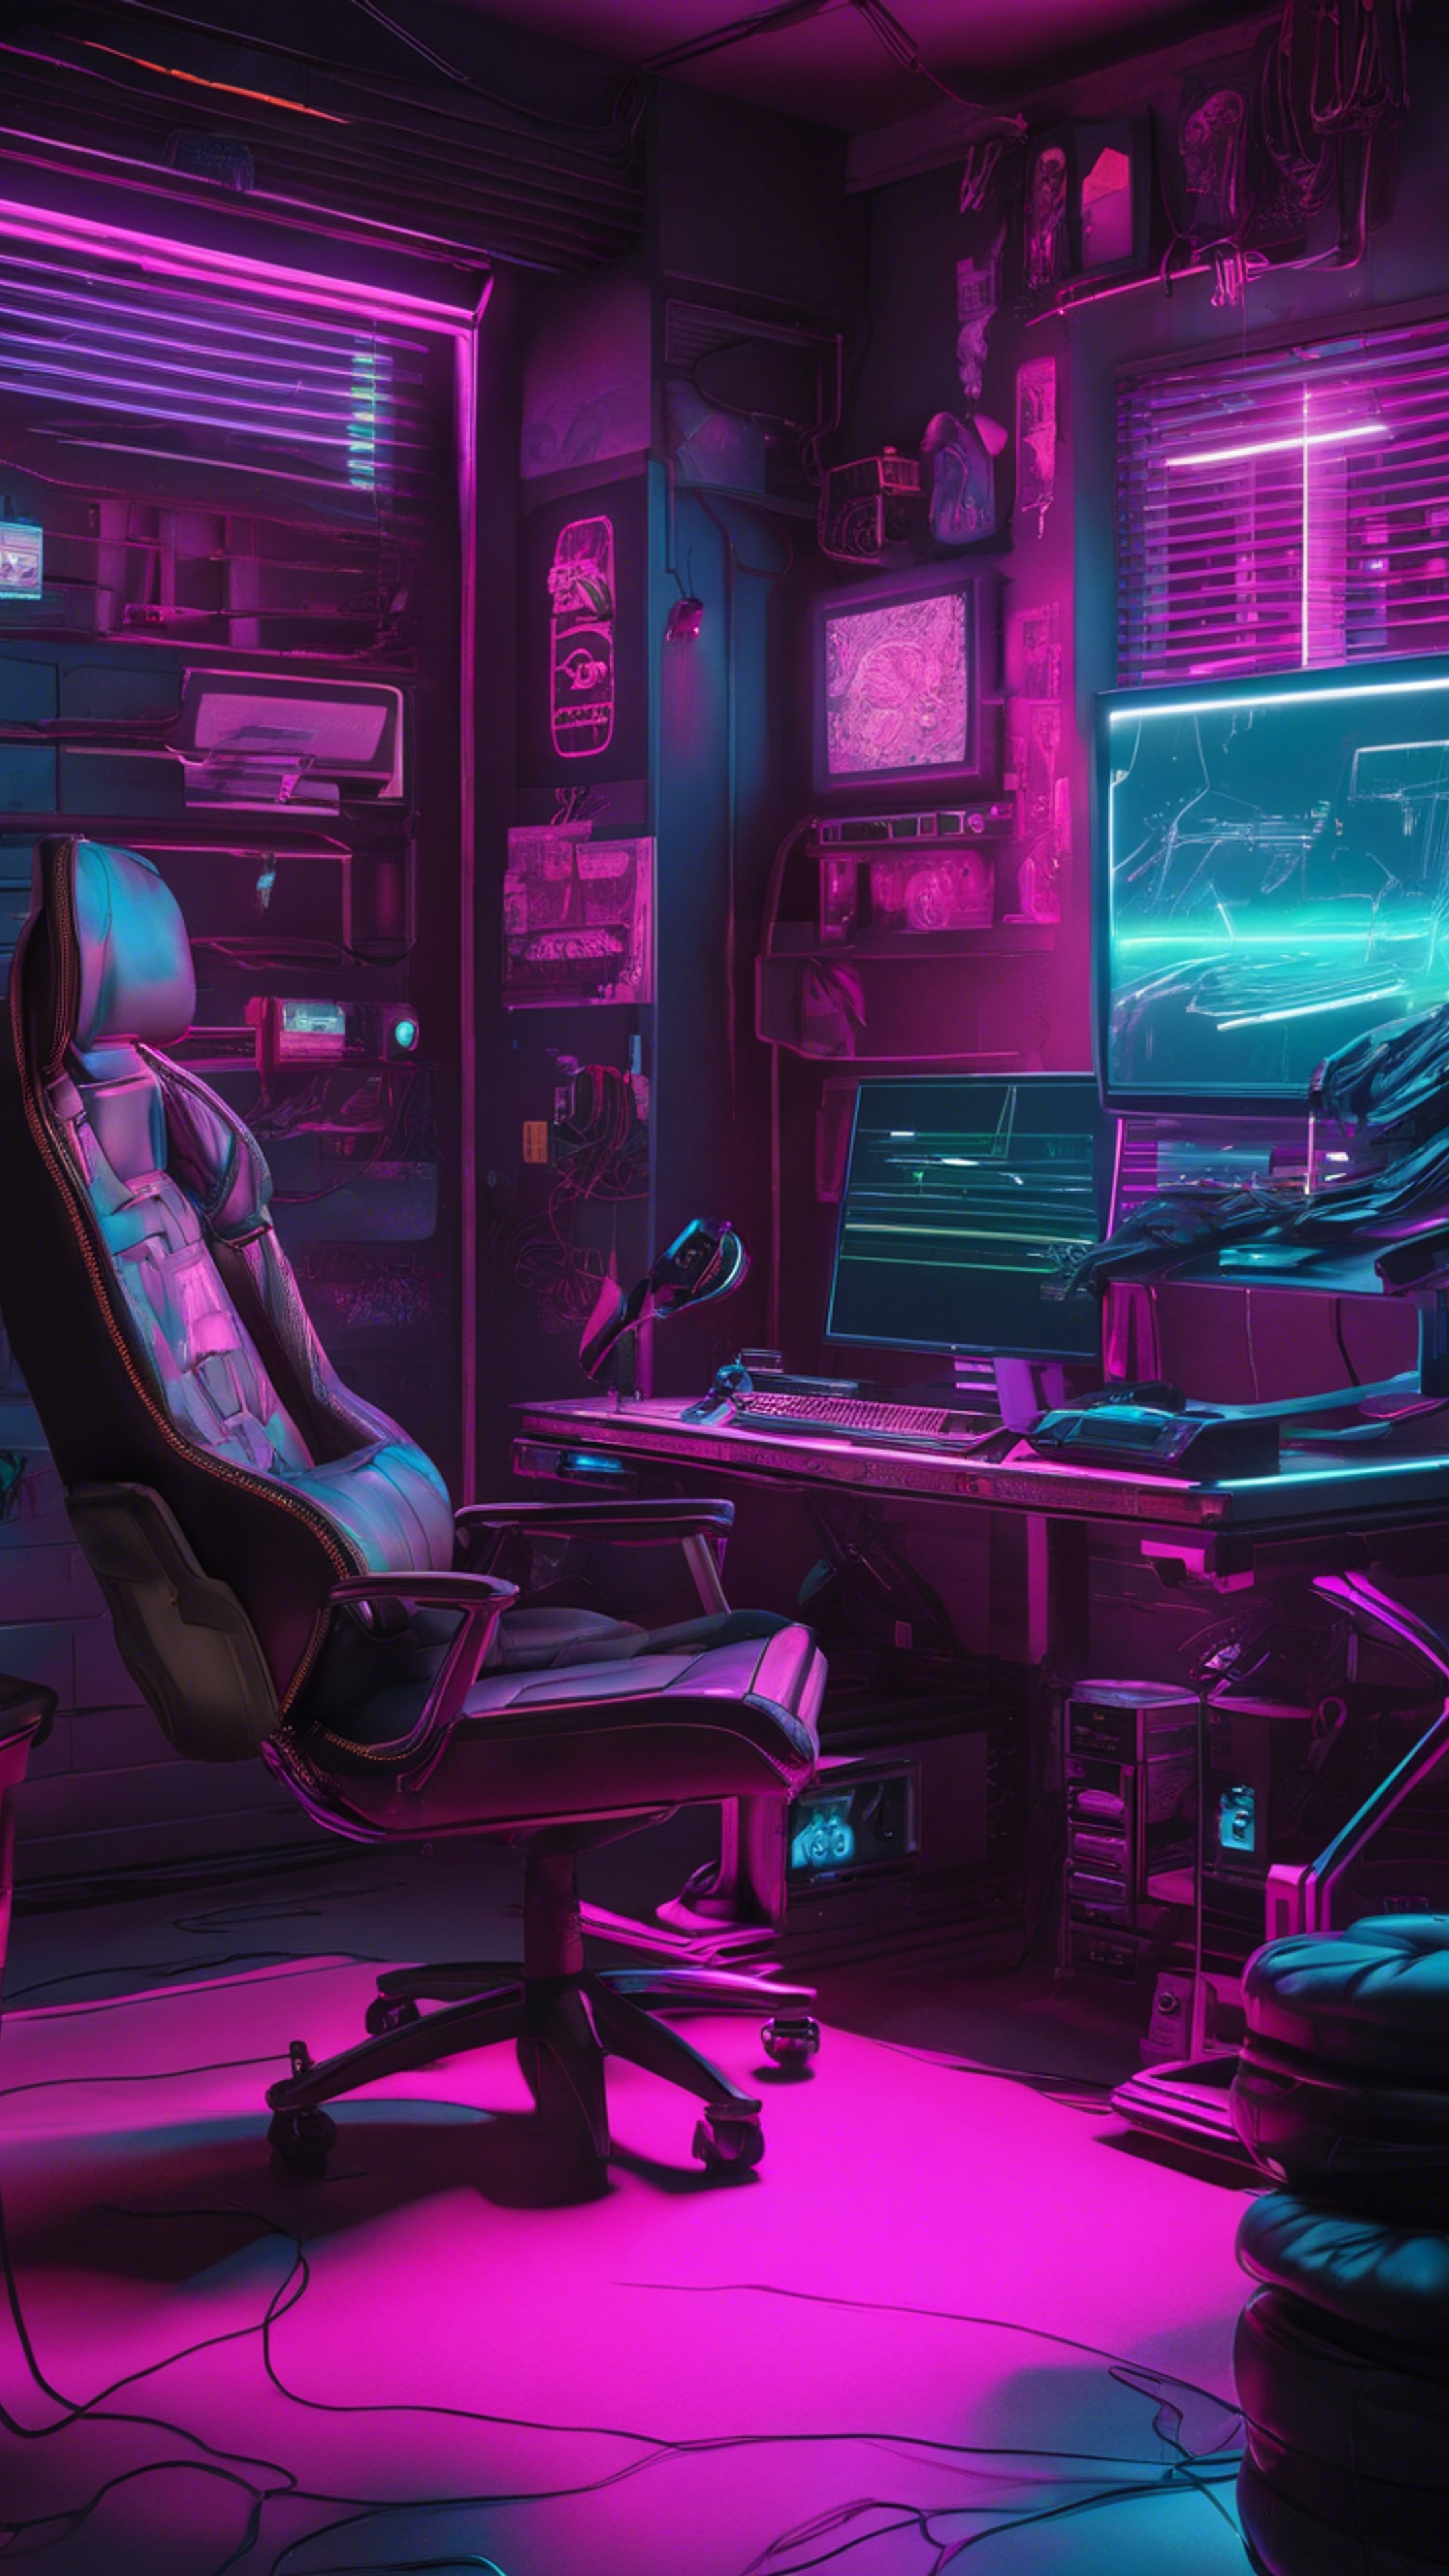 A dimly lit gaming room with black decorative elements including a gaming chair, desk, computer, and multiple monitors. วอลล์เปเปอร์[a03b1682102f4dafa767]